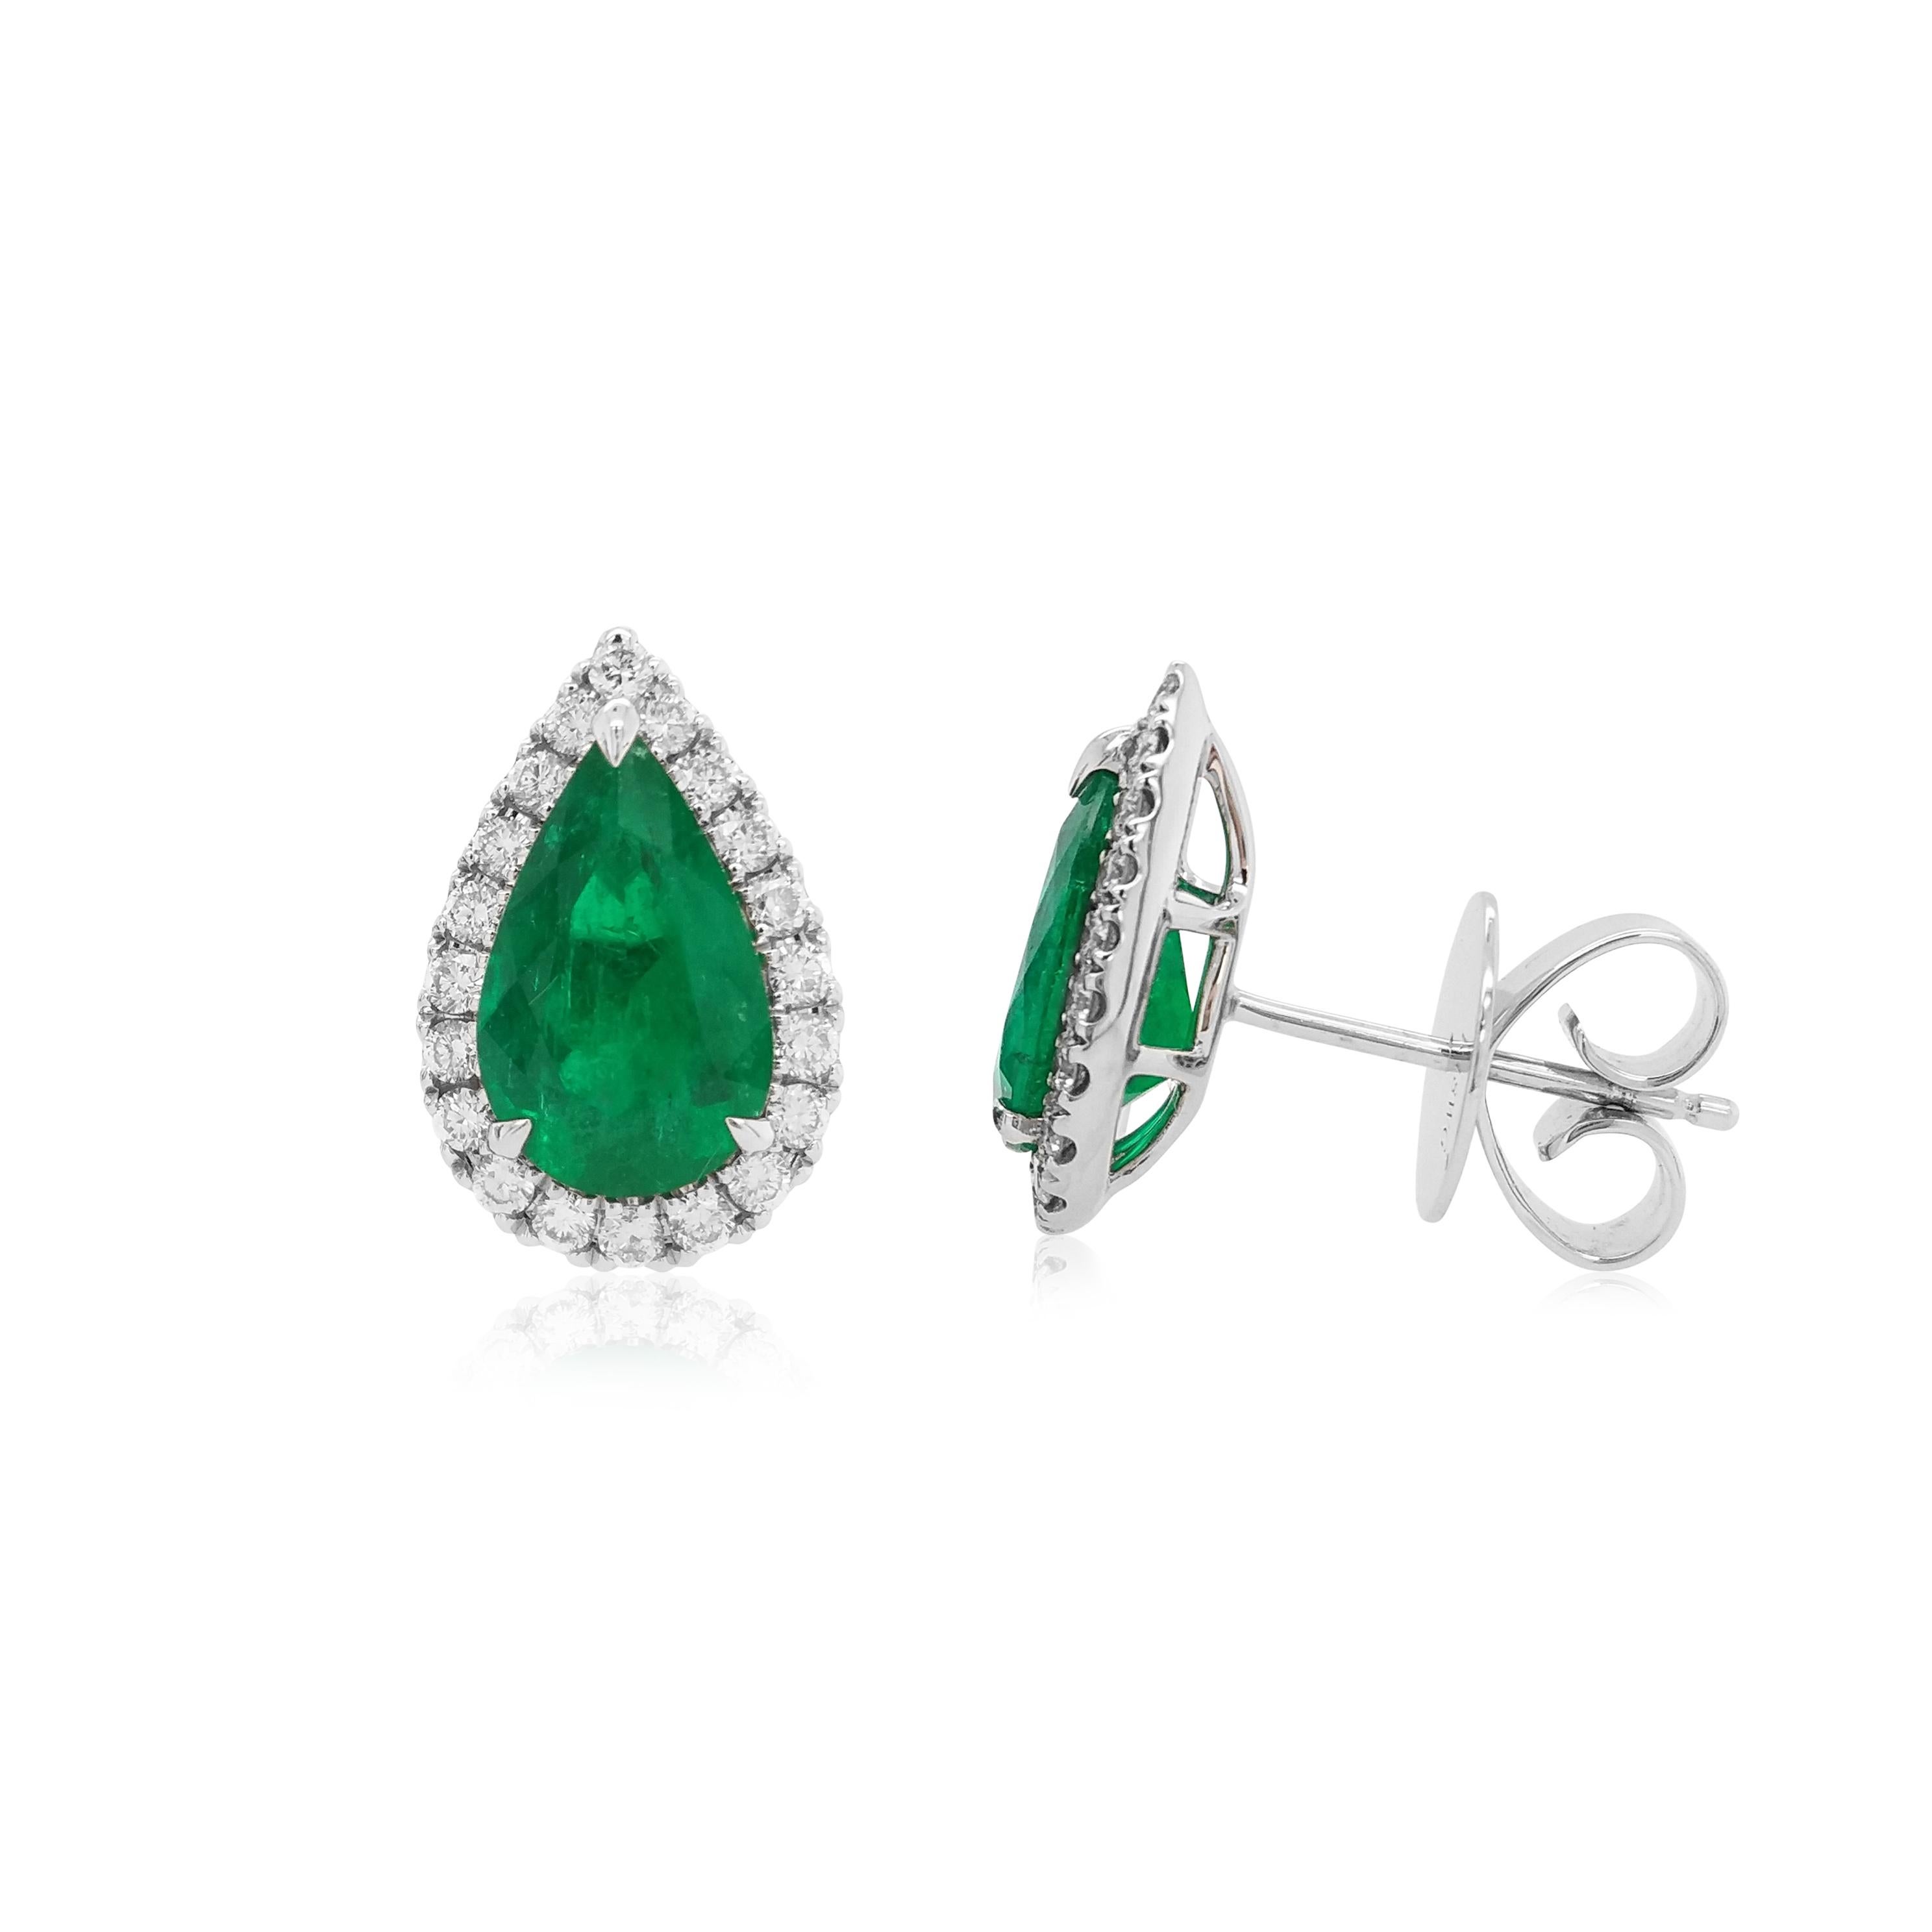 These timeless earrings feature lustrous pear-shaped Colombian Emeralds surrounded by a delicate scintillating white diamond halo. These earrings are a contemporary classic and will make the perfect addition to any jewelry collection.
-	Pear-Shape